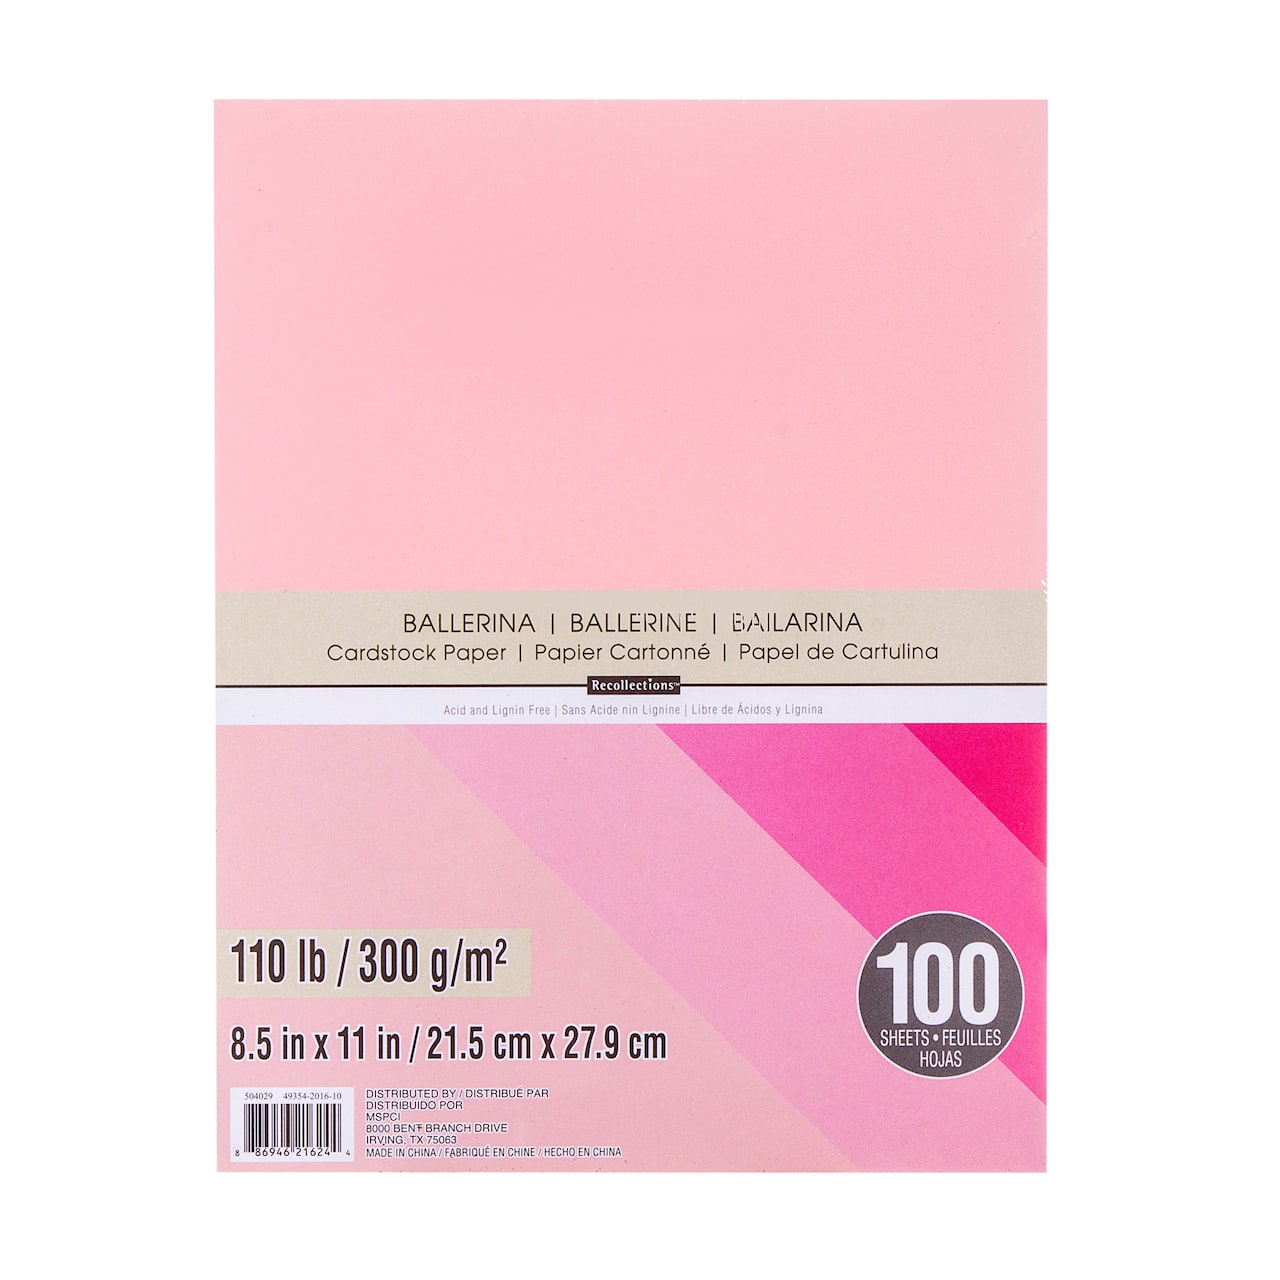 Ballerina 8.5 x 11 Cardstock Paper by Recollections™, 100 Sheets